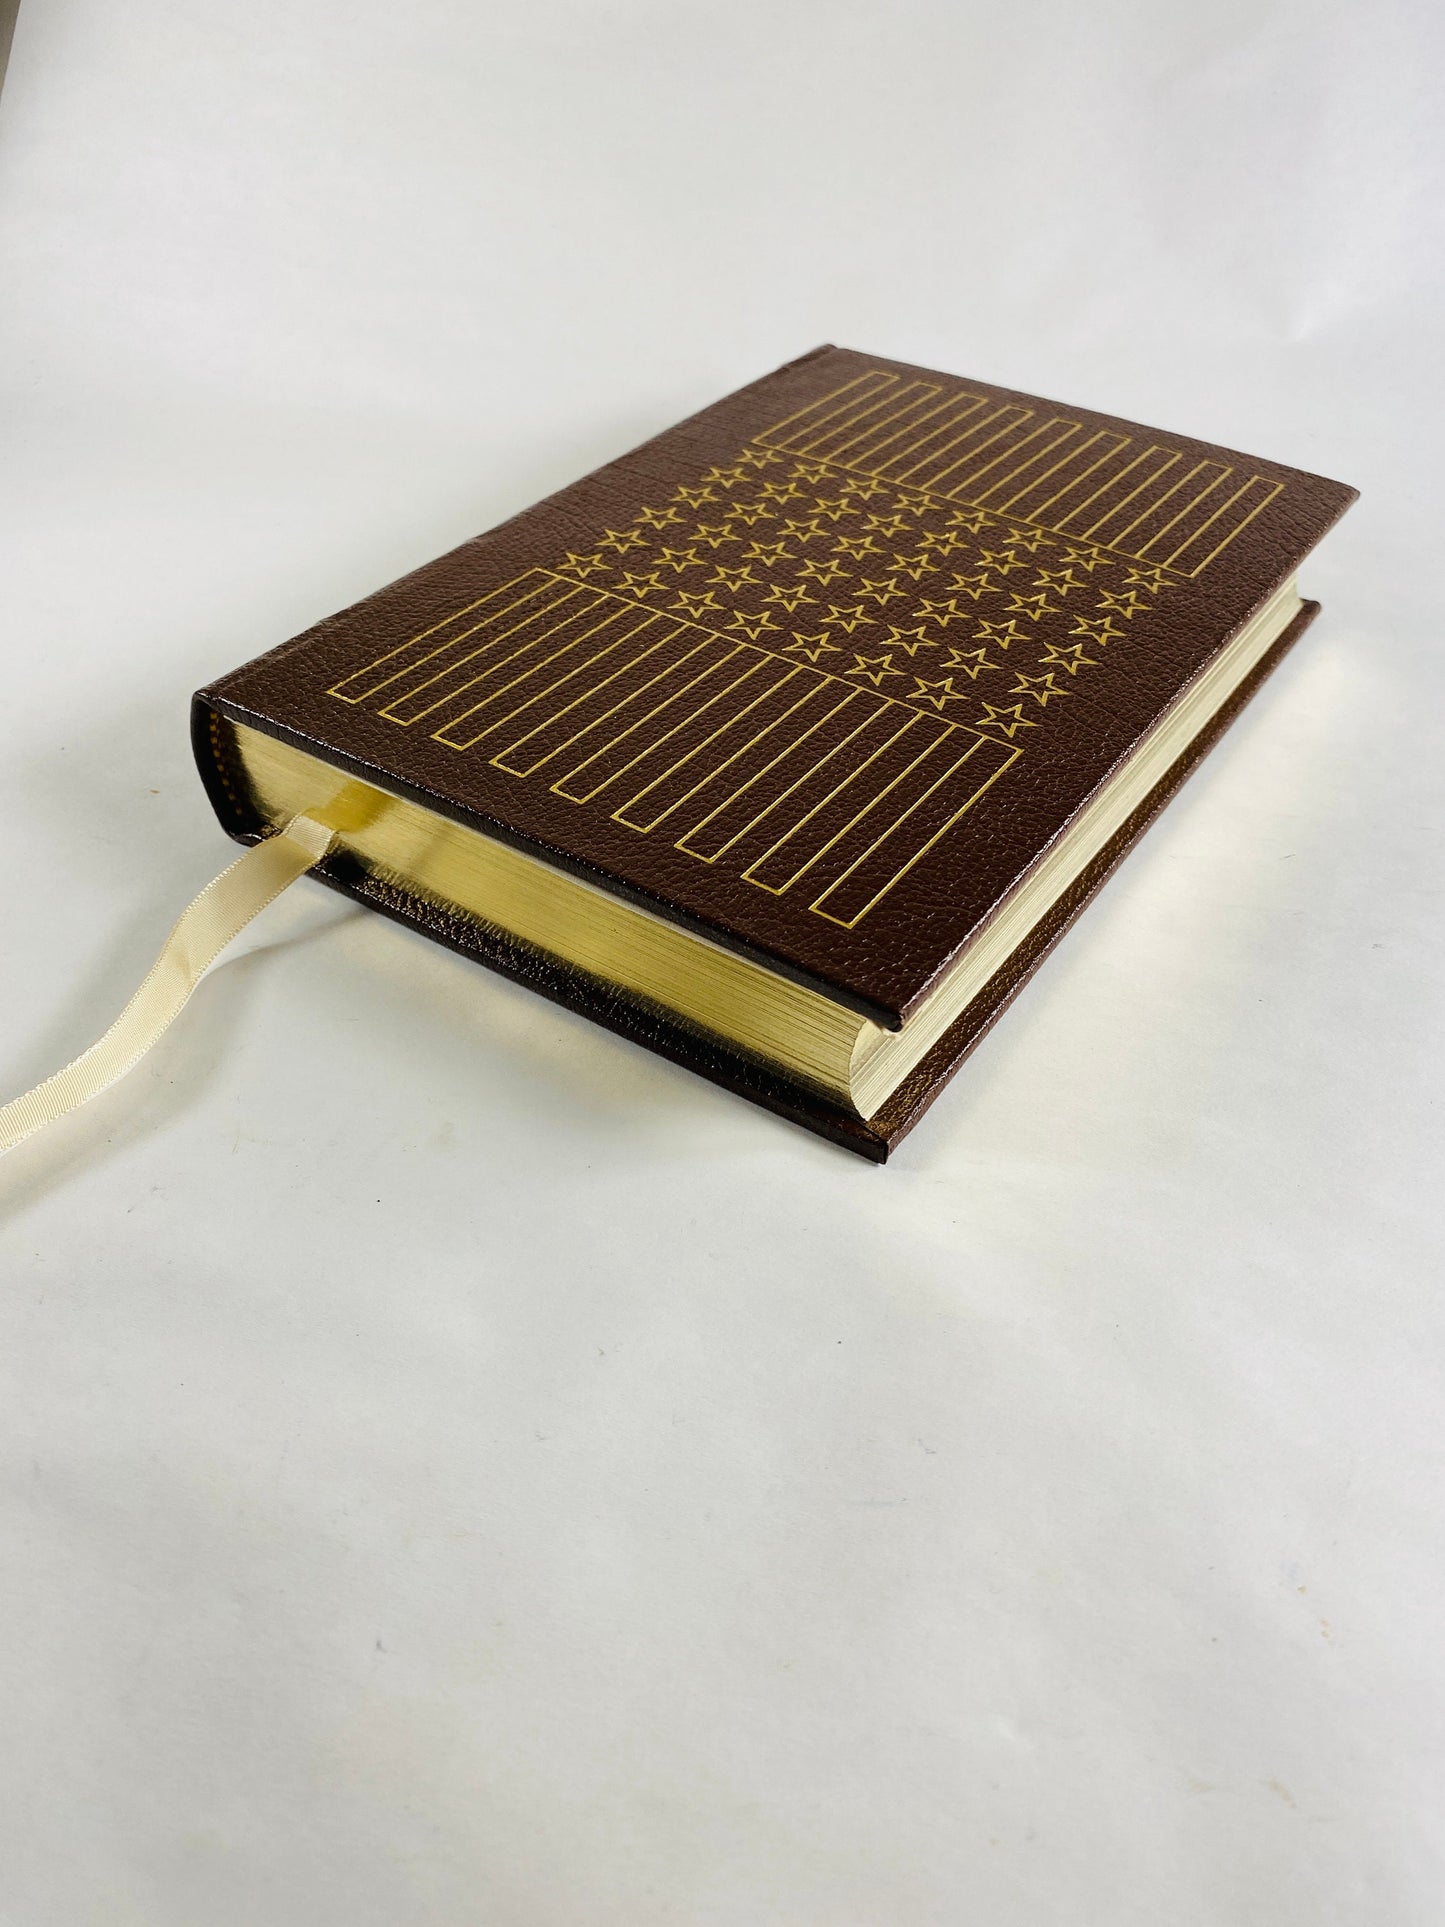 Woodrow Wilson American President vintage Easton Press book by Arthur Walworth circa 1978 BEAUTIFUL brown leather with gold gilt